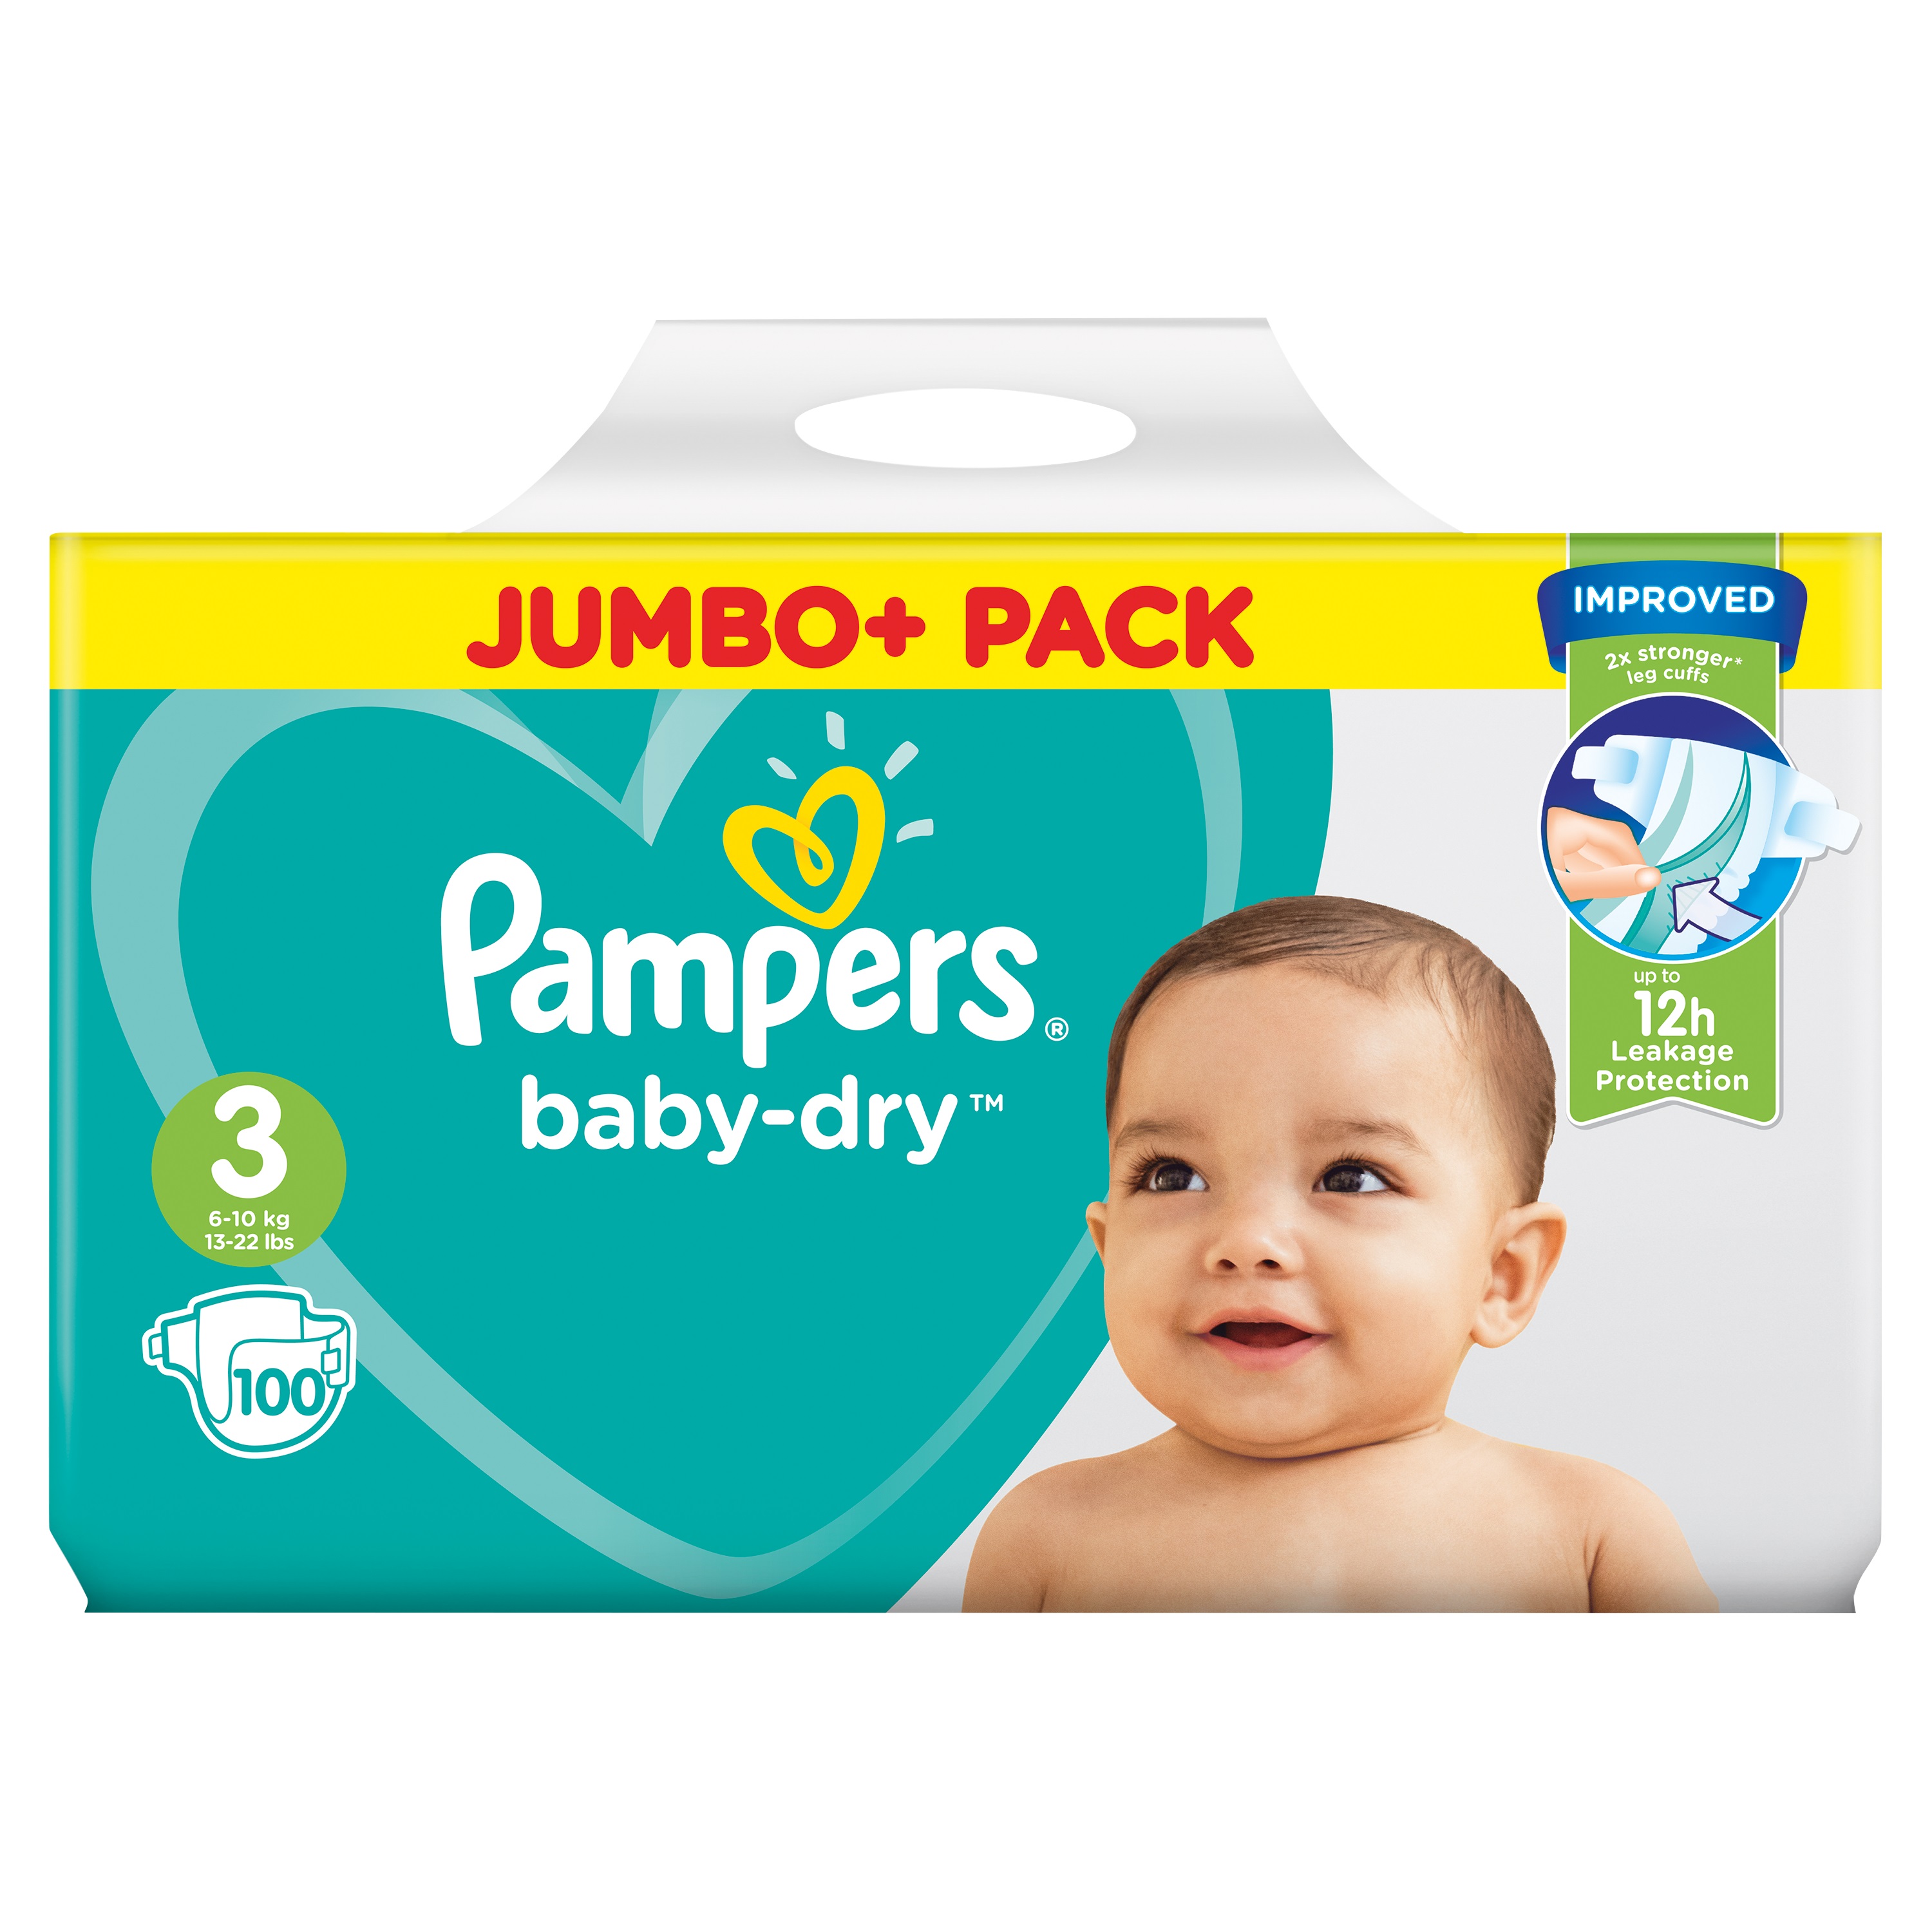 pampers pure protection rozmiar 2